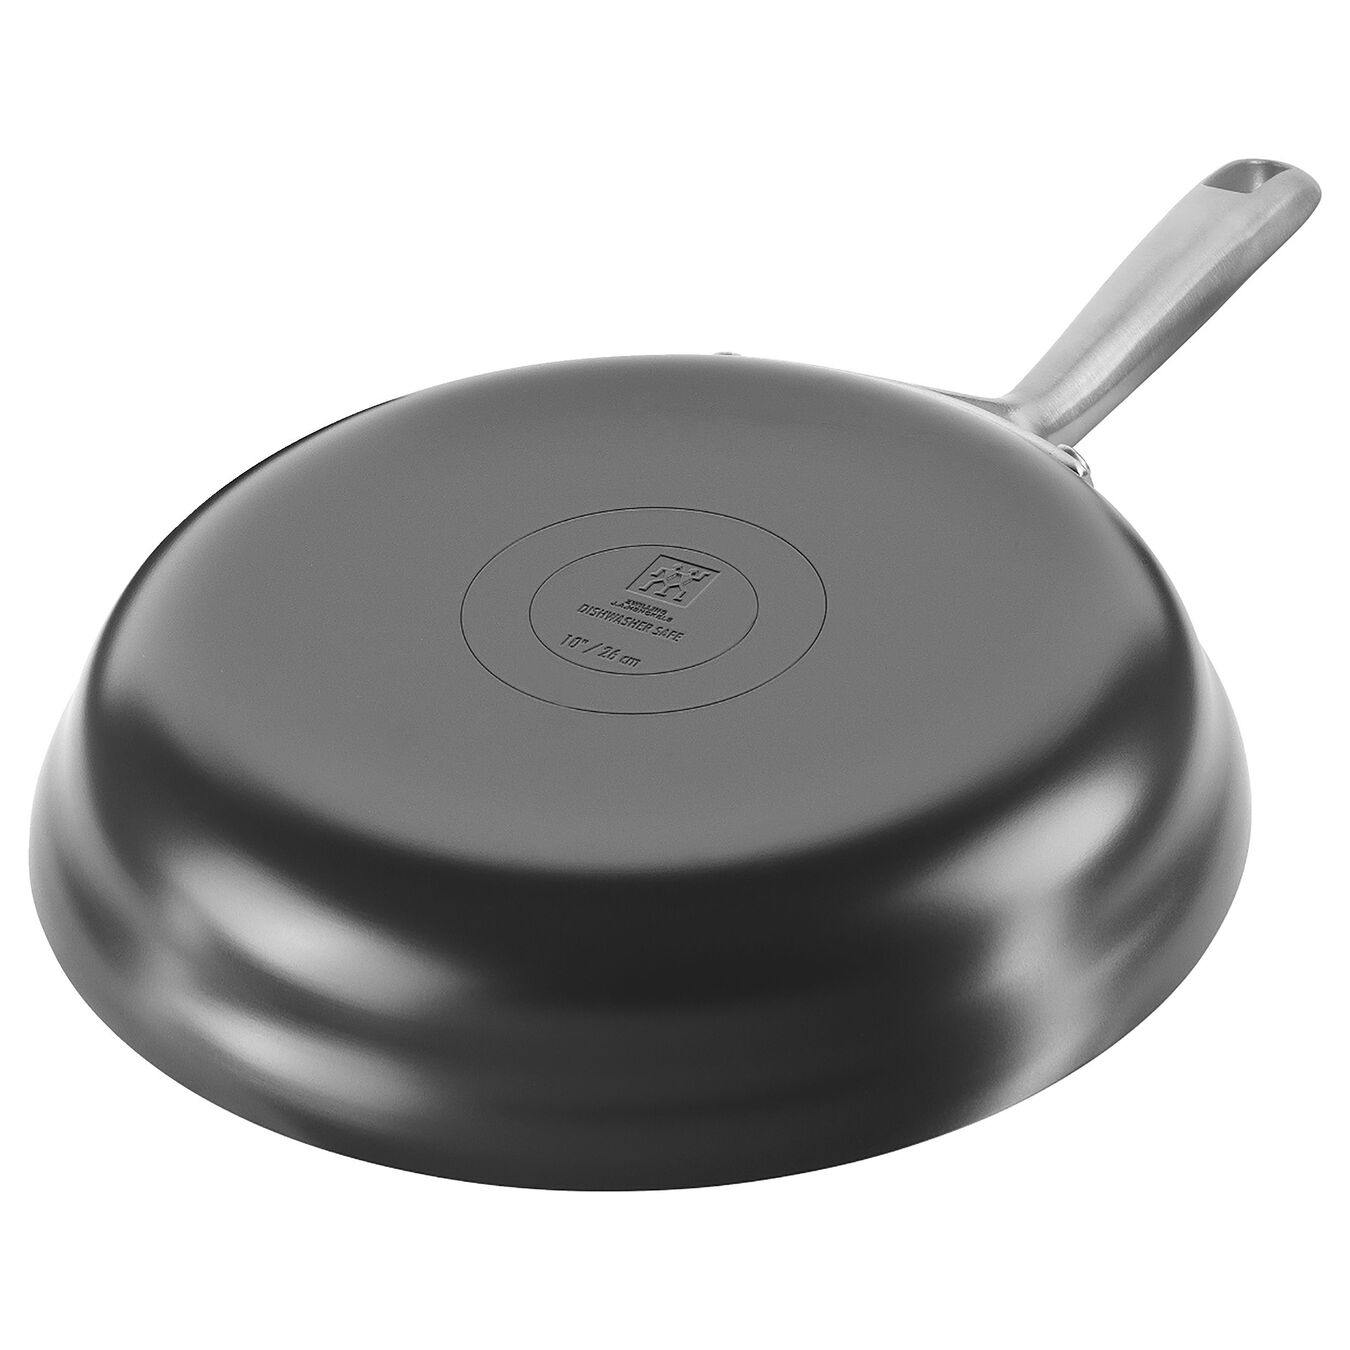 Zwilling Motion 3-Piece Fry Pan Set